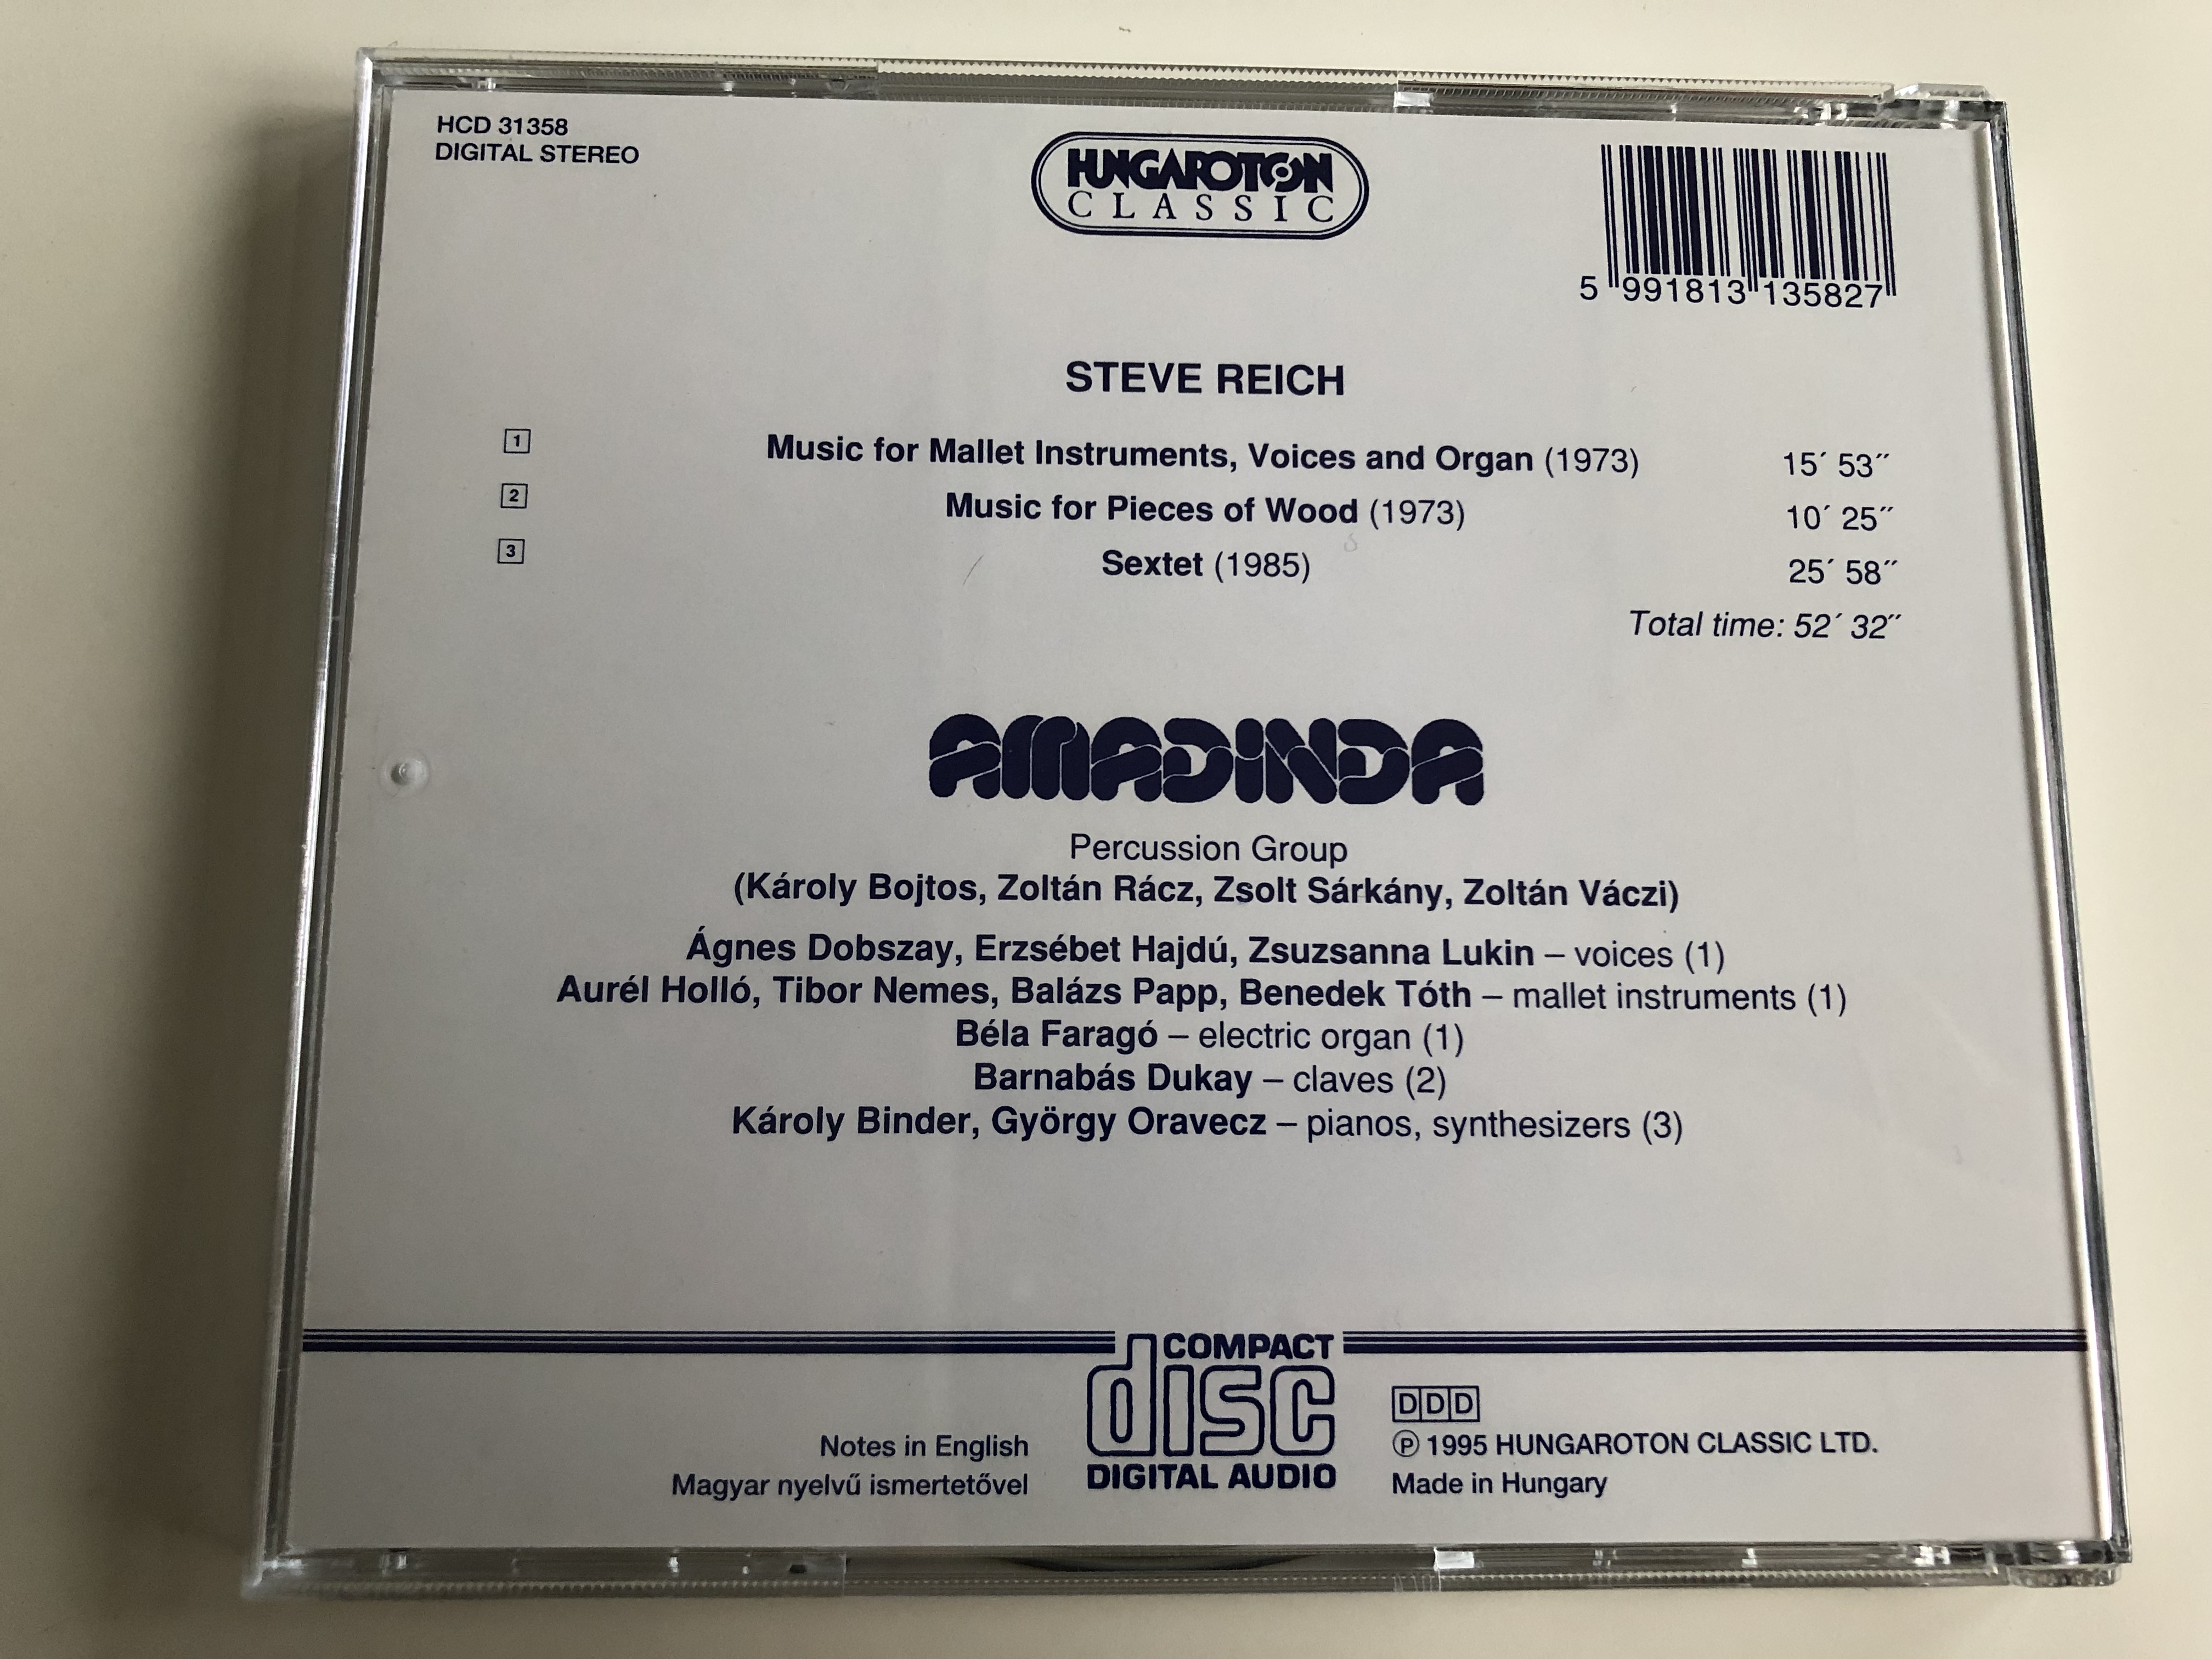 steve-reich-music-for-mallet-instruments-voices-and-organ-music-for-pieces-of-wood-sextet-amadinda-percussion-group-audio-cd-1995-hungaroton-classic-hcd-31358-5-.jpg